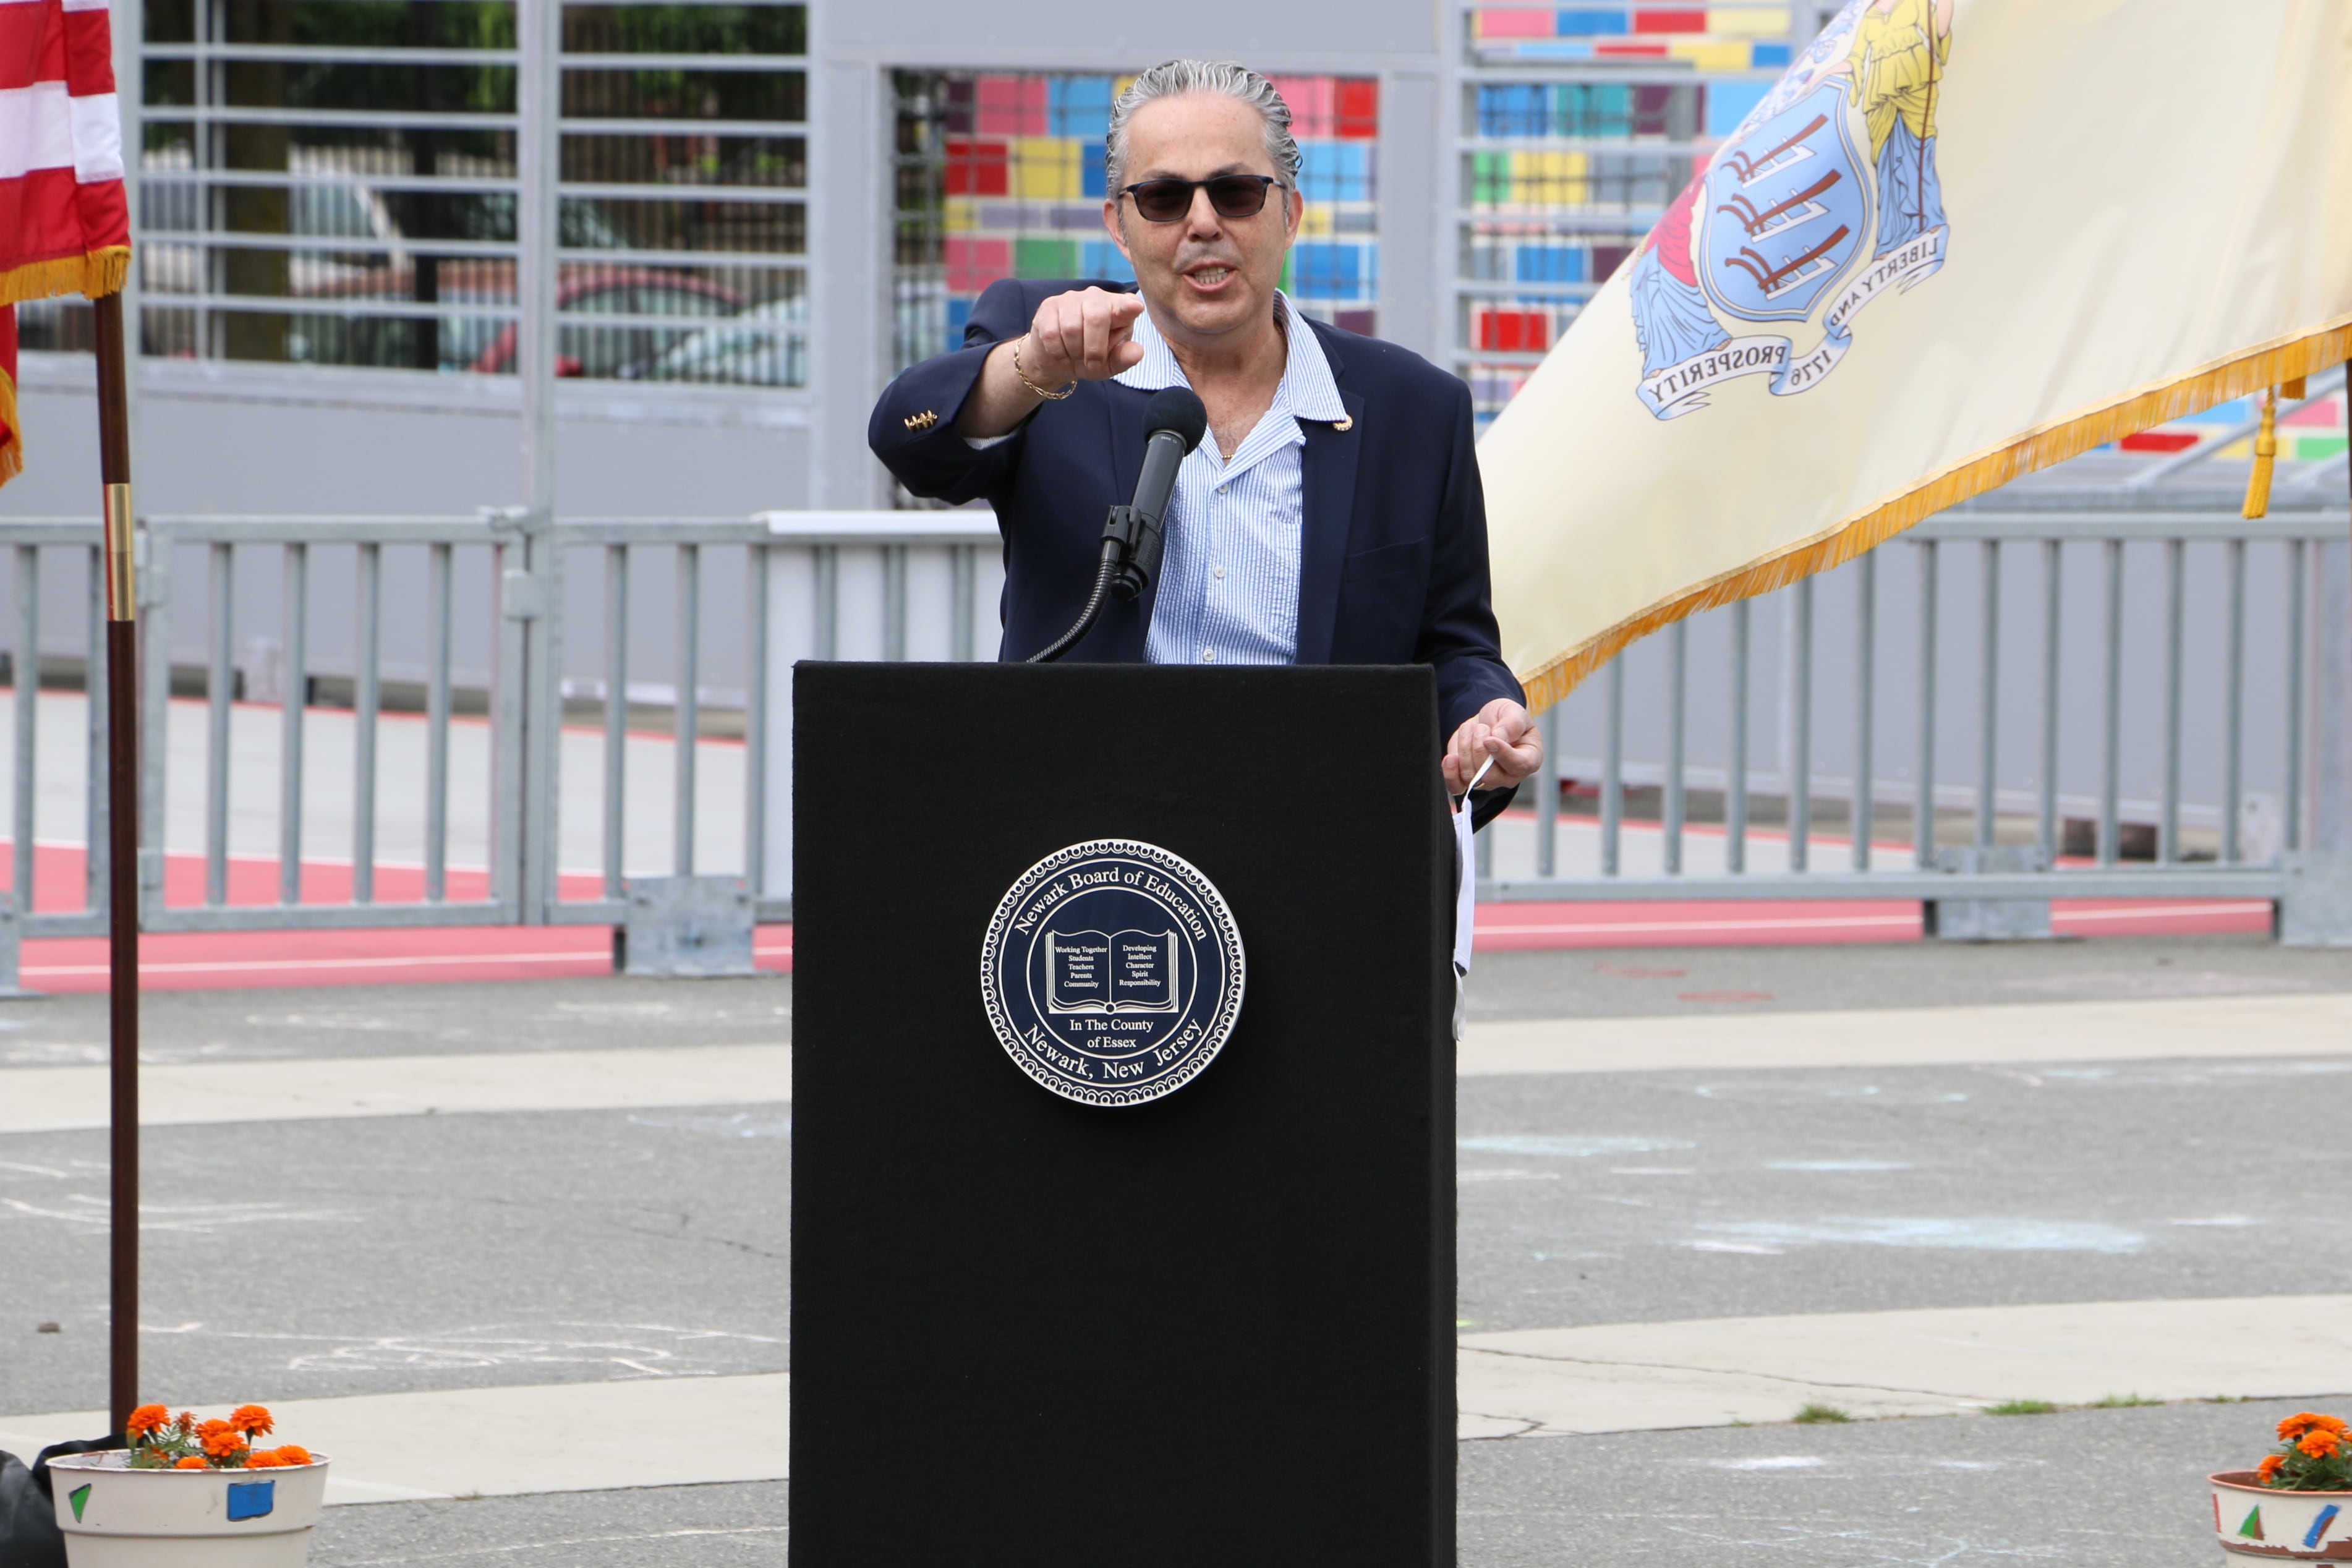 Man wearing sunglasses and a blue button-up shirt with a black blazer stands at a podium pointing in the direction of the camera.